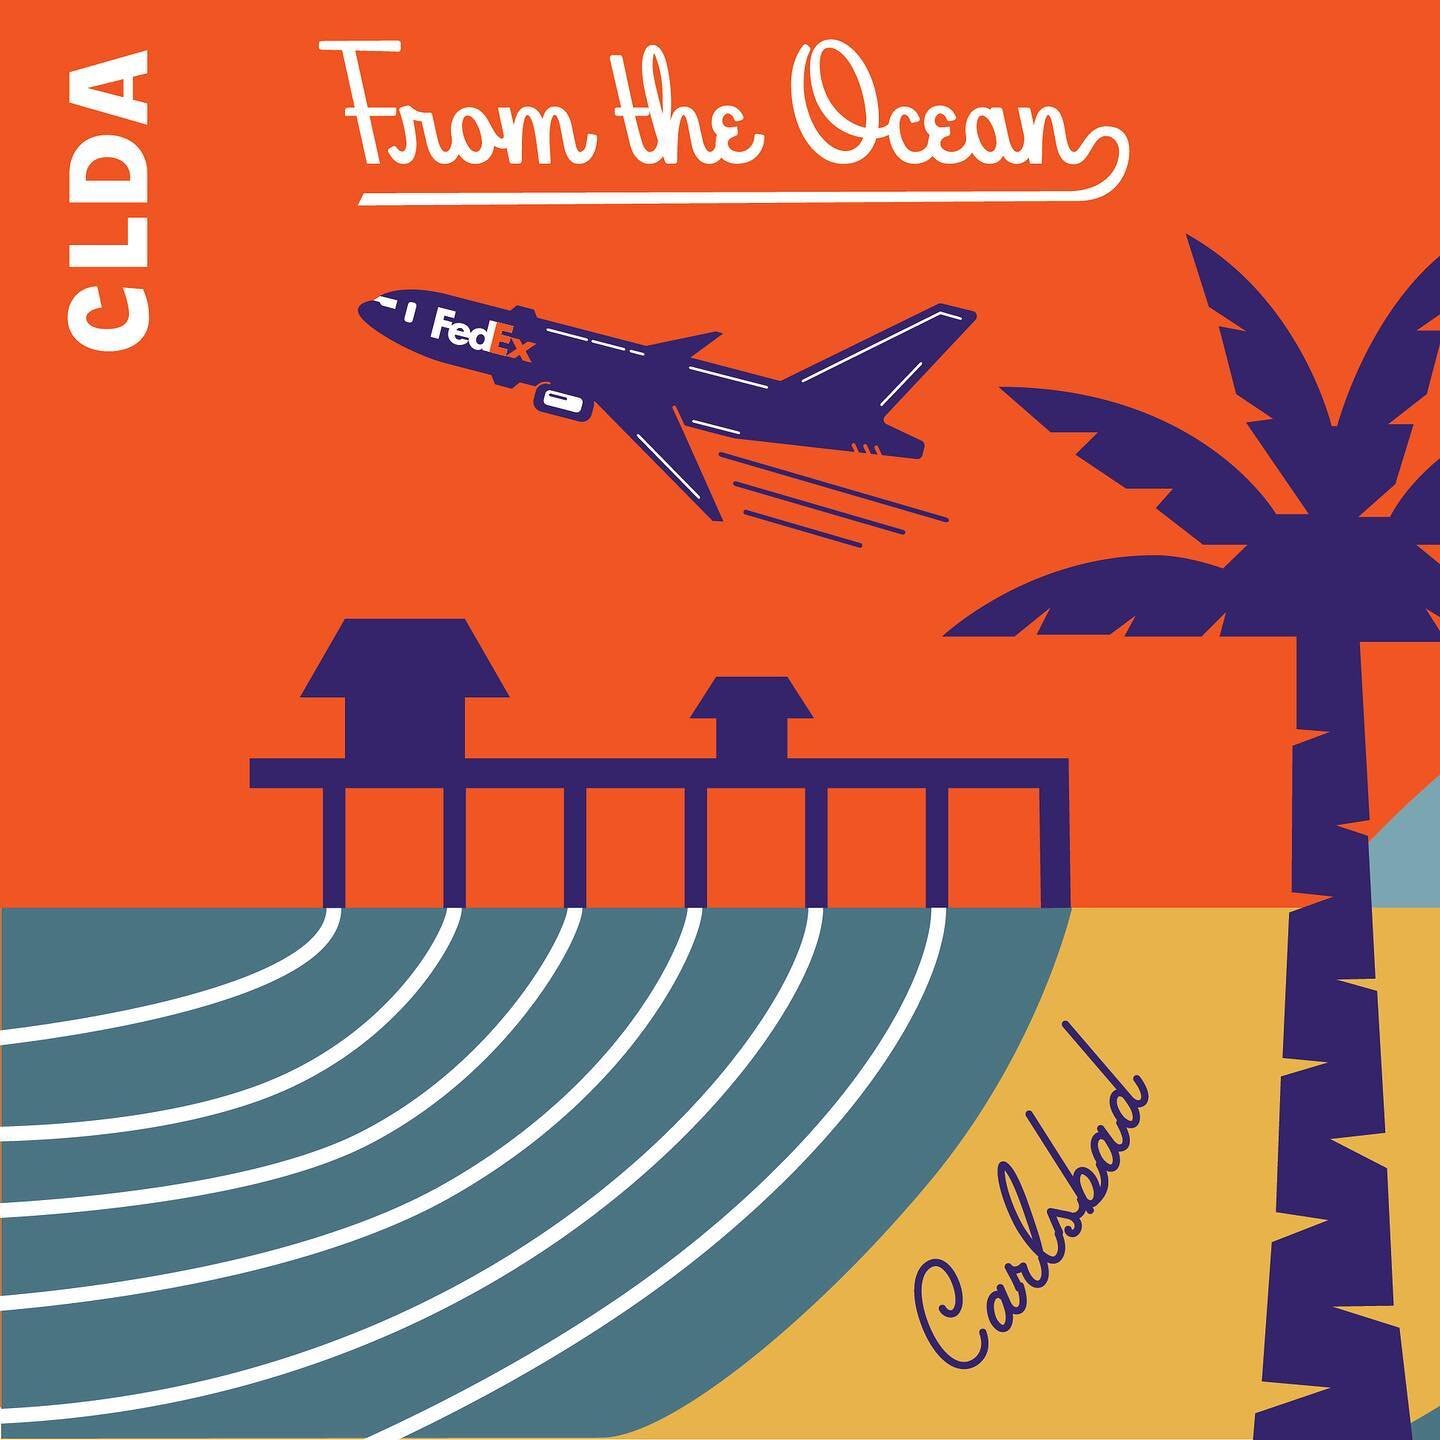 Here is a closer look into the digital artwork for the new mural @fedex Ship Center in Carlsbad. 

For all of my mural projects, I create digital artwork like this. The process starts with sketching on my iPad and is eventually vectorized on the comp